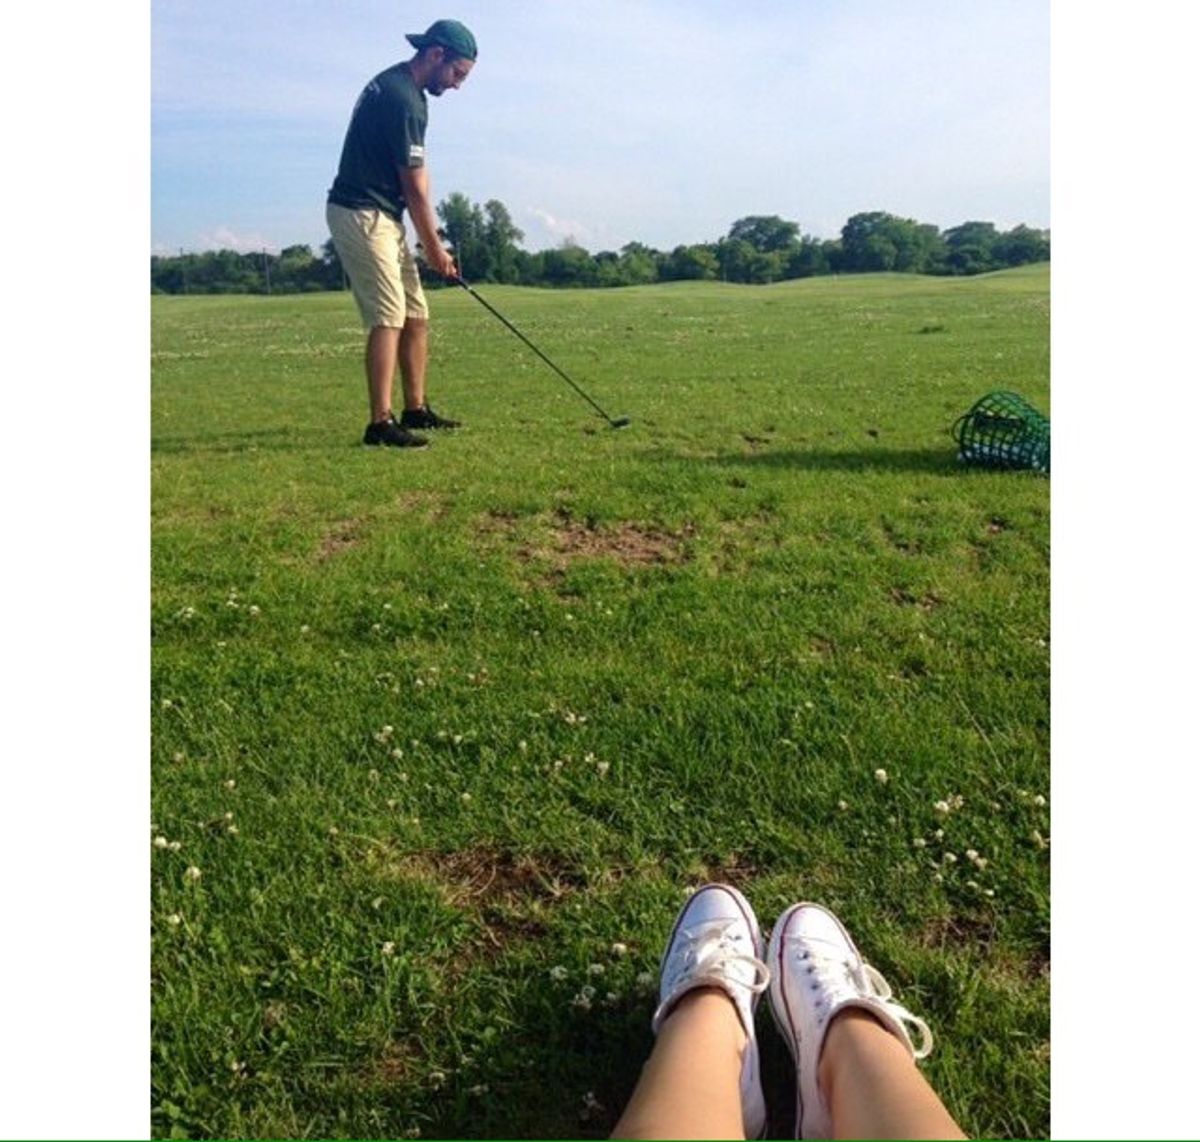 7 Things That Happen When You Date A Caddy